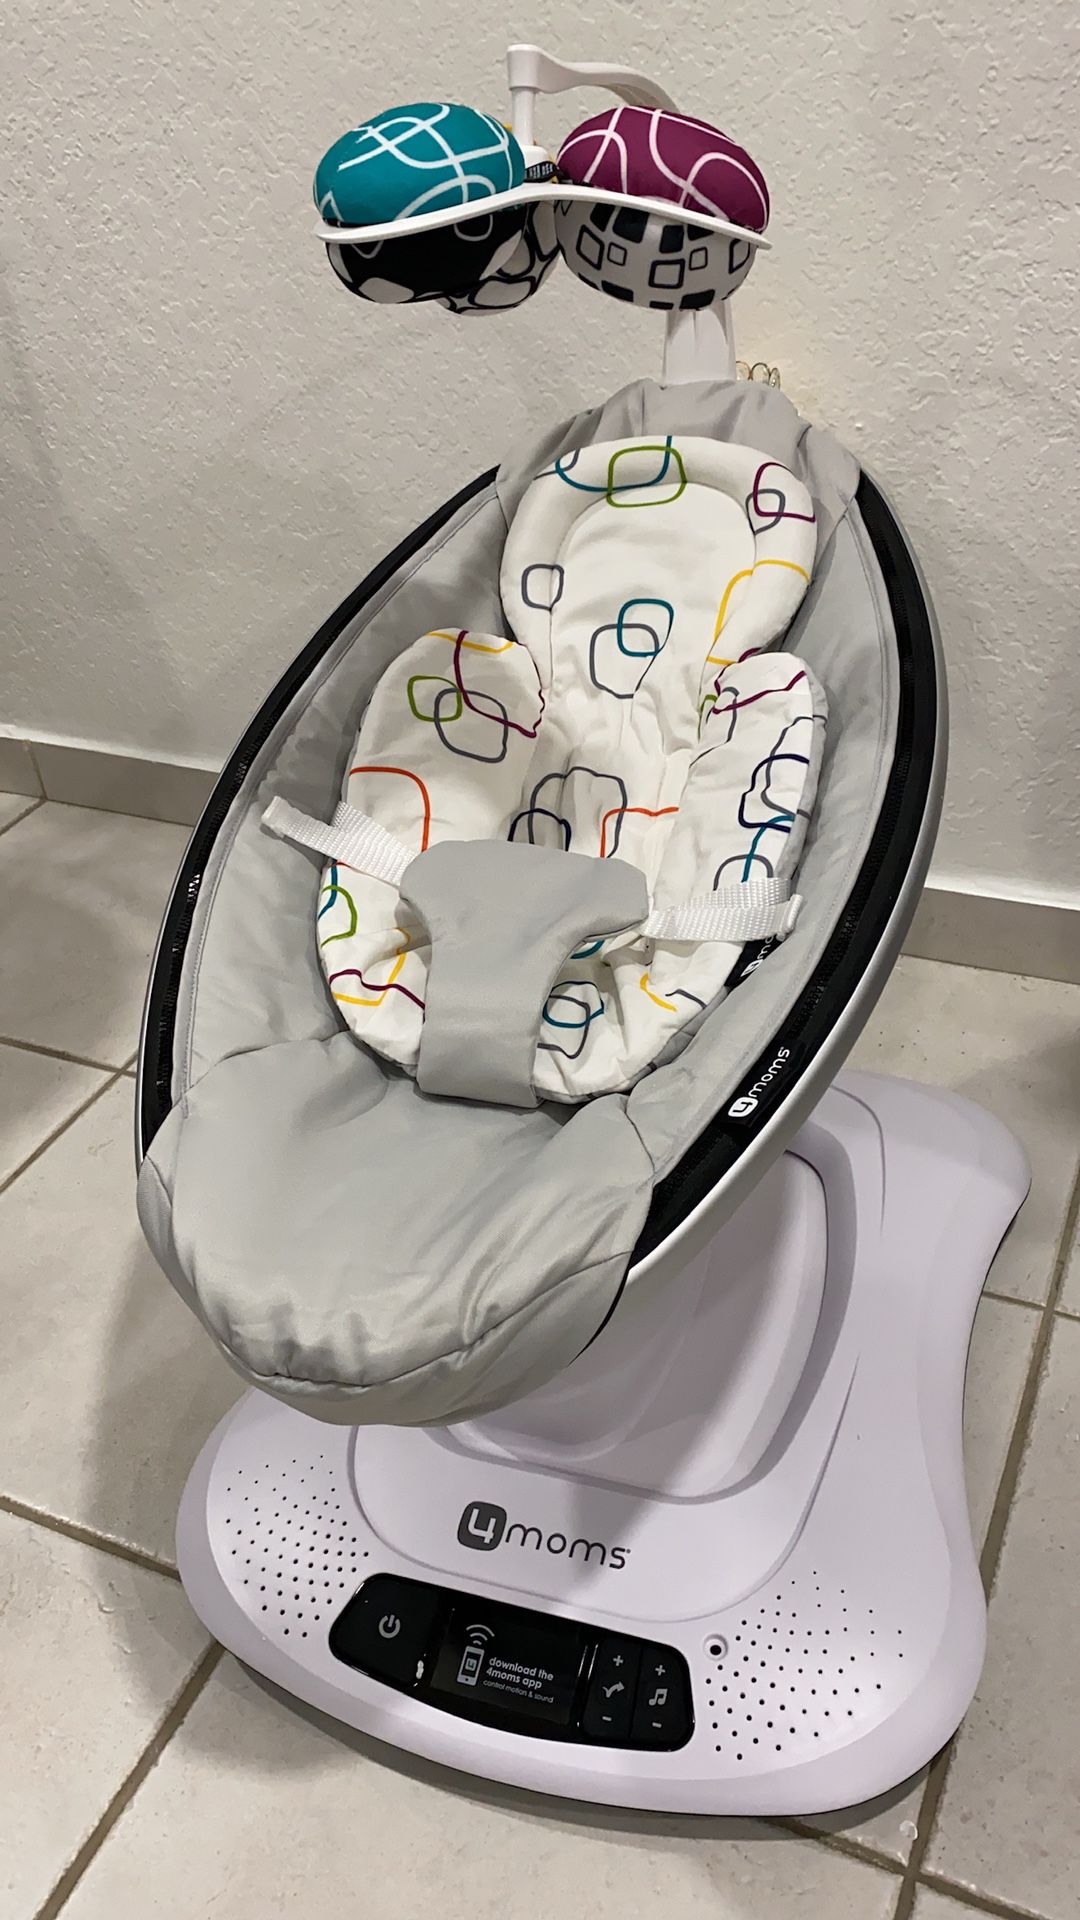 4moms mamaRoo 4 Baby Swing, Bluetooth Baby Rocker with 5 Unique Motions, Smooth, Nylon Fabric